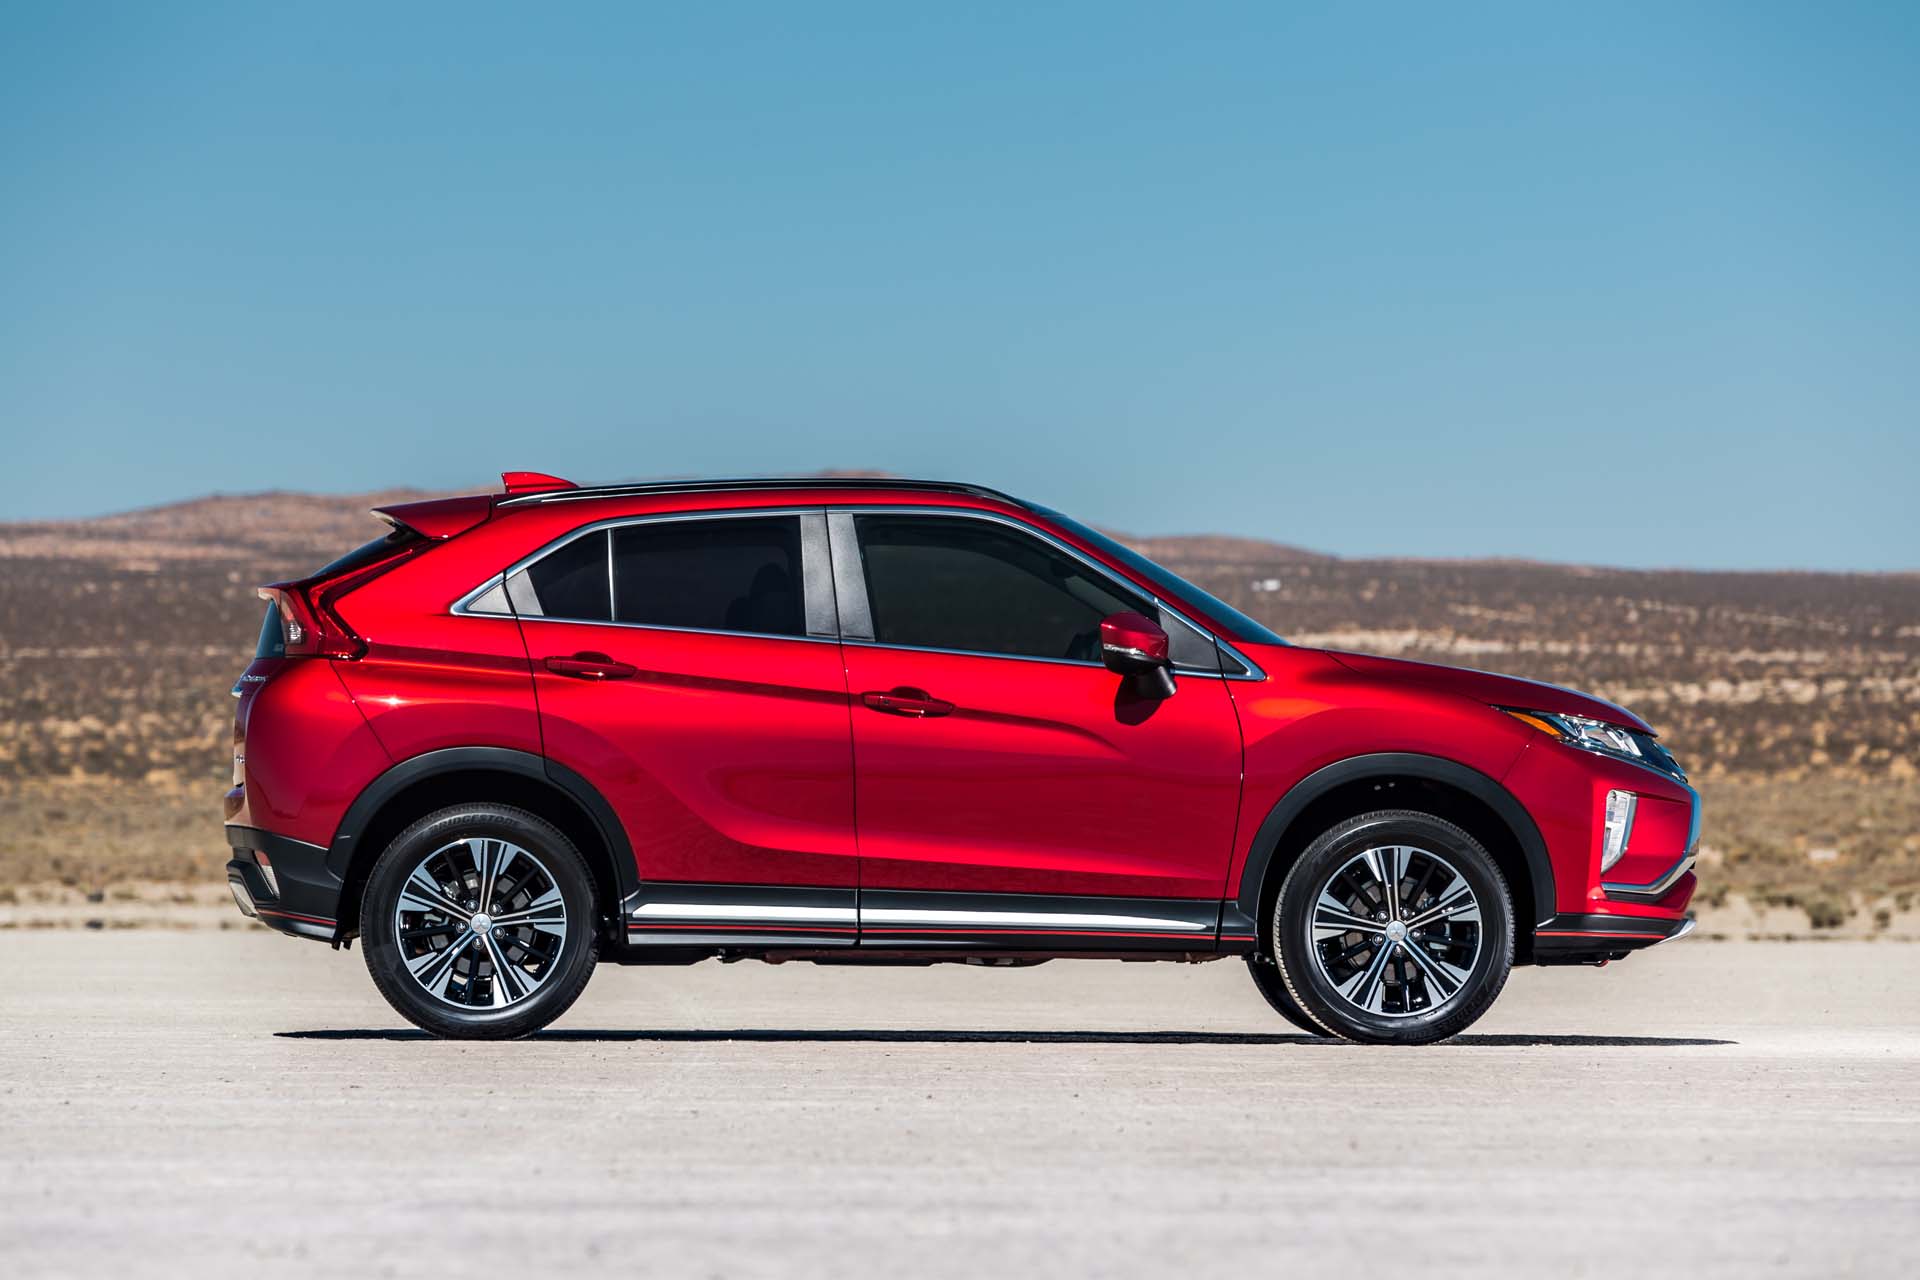 2018 Mitsubishi Eclipse Cross Review, Ratings, Specs